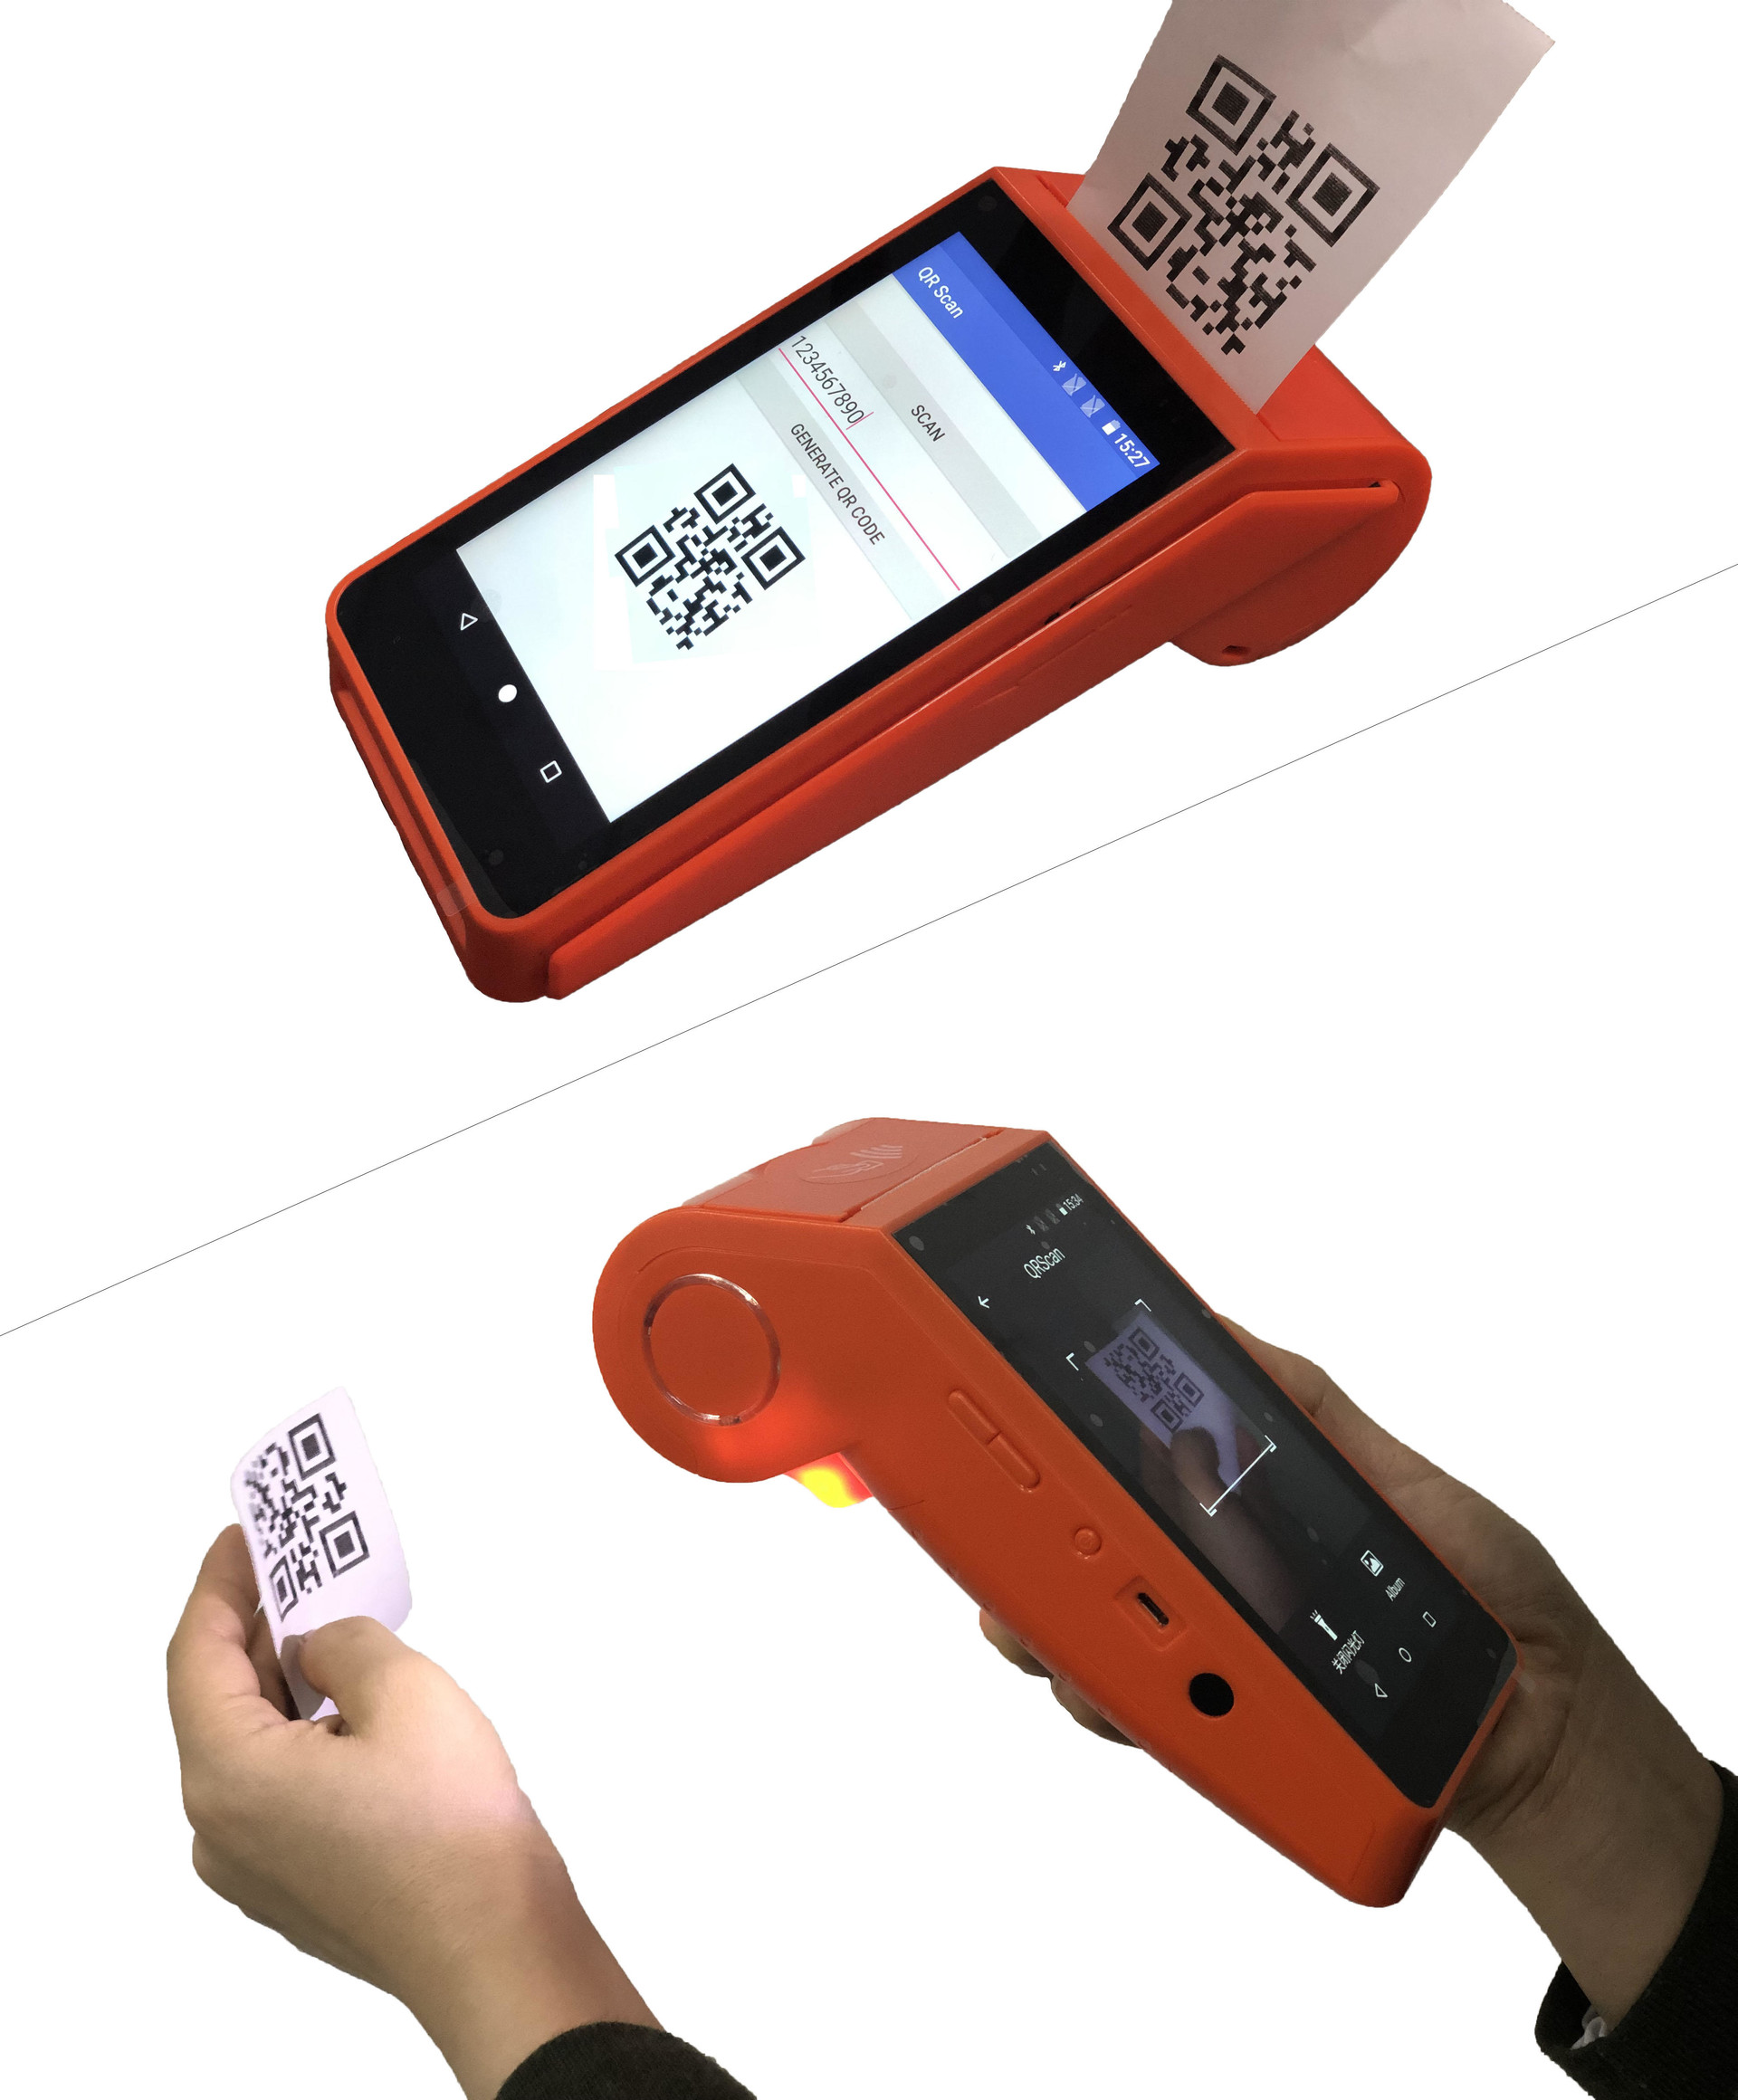 Top Sale Mobile Topup Voucher Printing Handheld Android POS with Printer